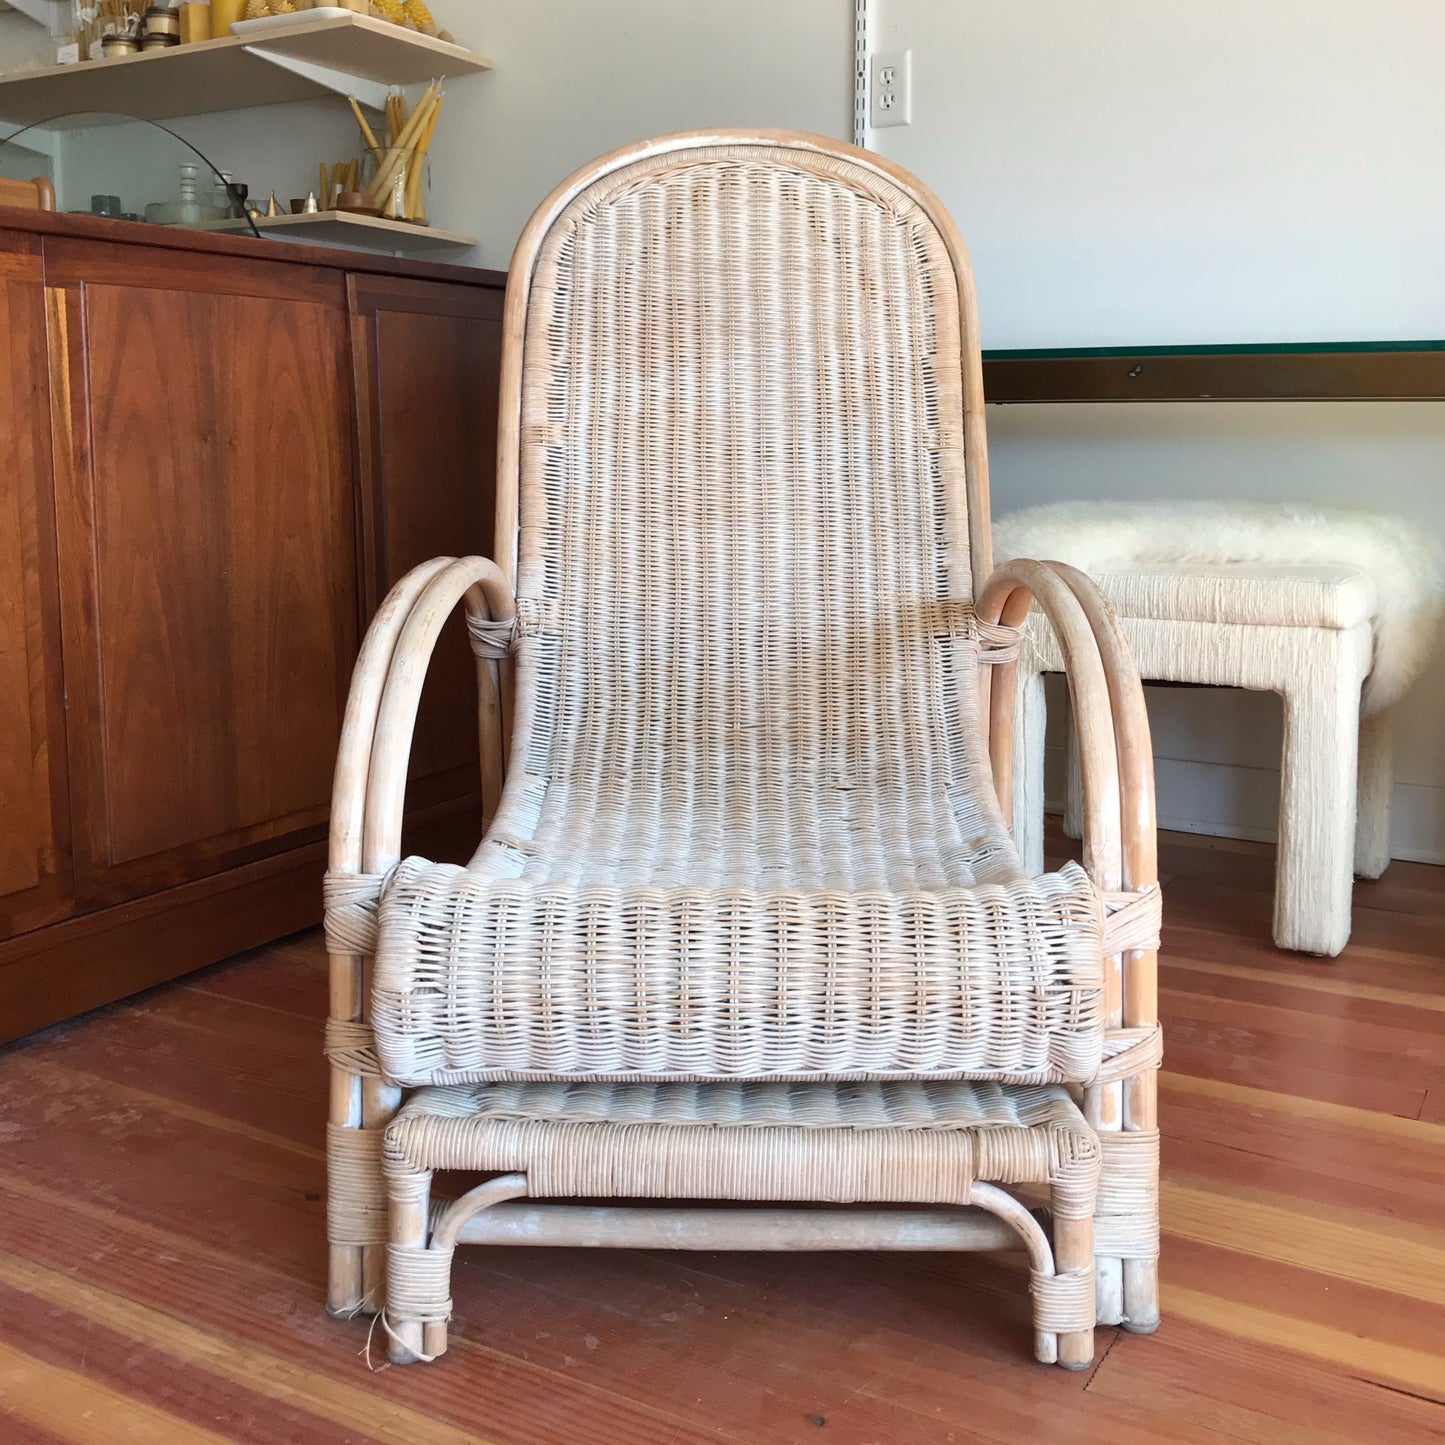 Vintage Wicker Lounger with Footrest